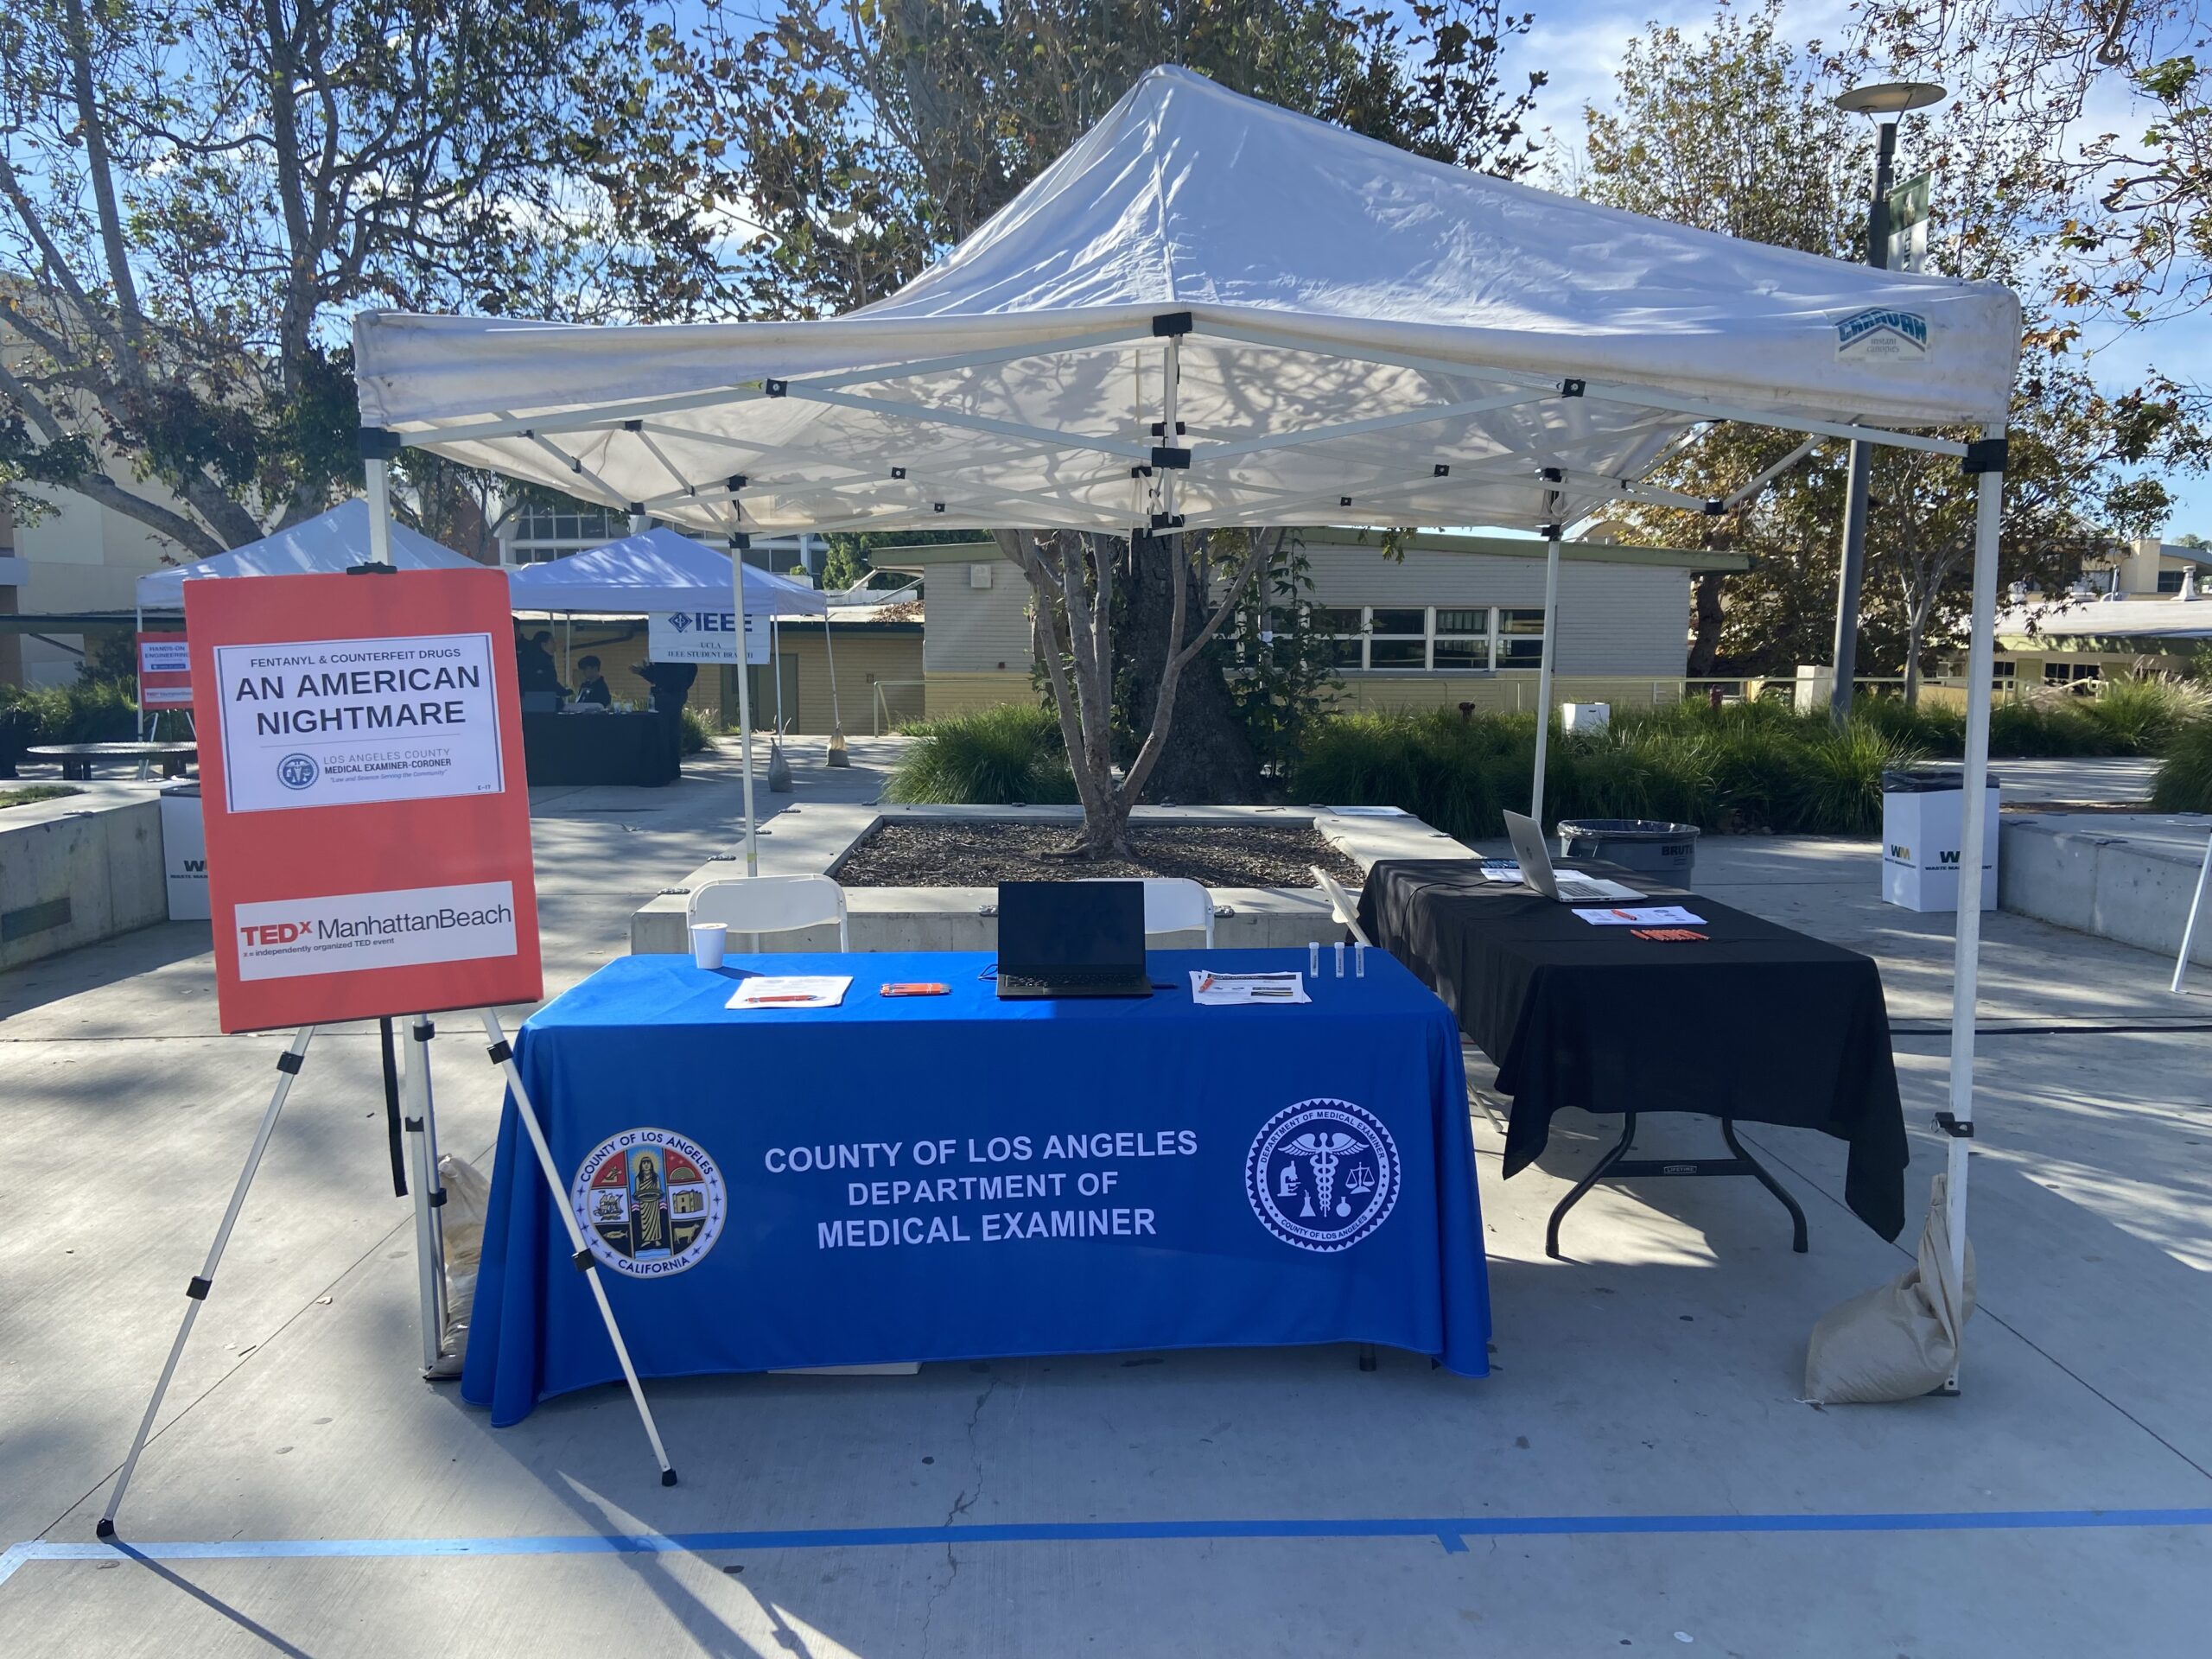 TEDex booth for County of Los Angeles Dept. of Medical Examiner. Tables and poster under tent.